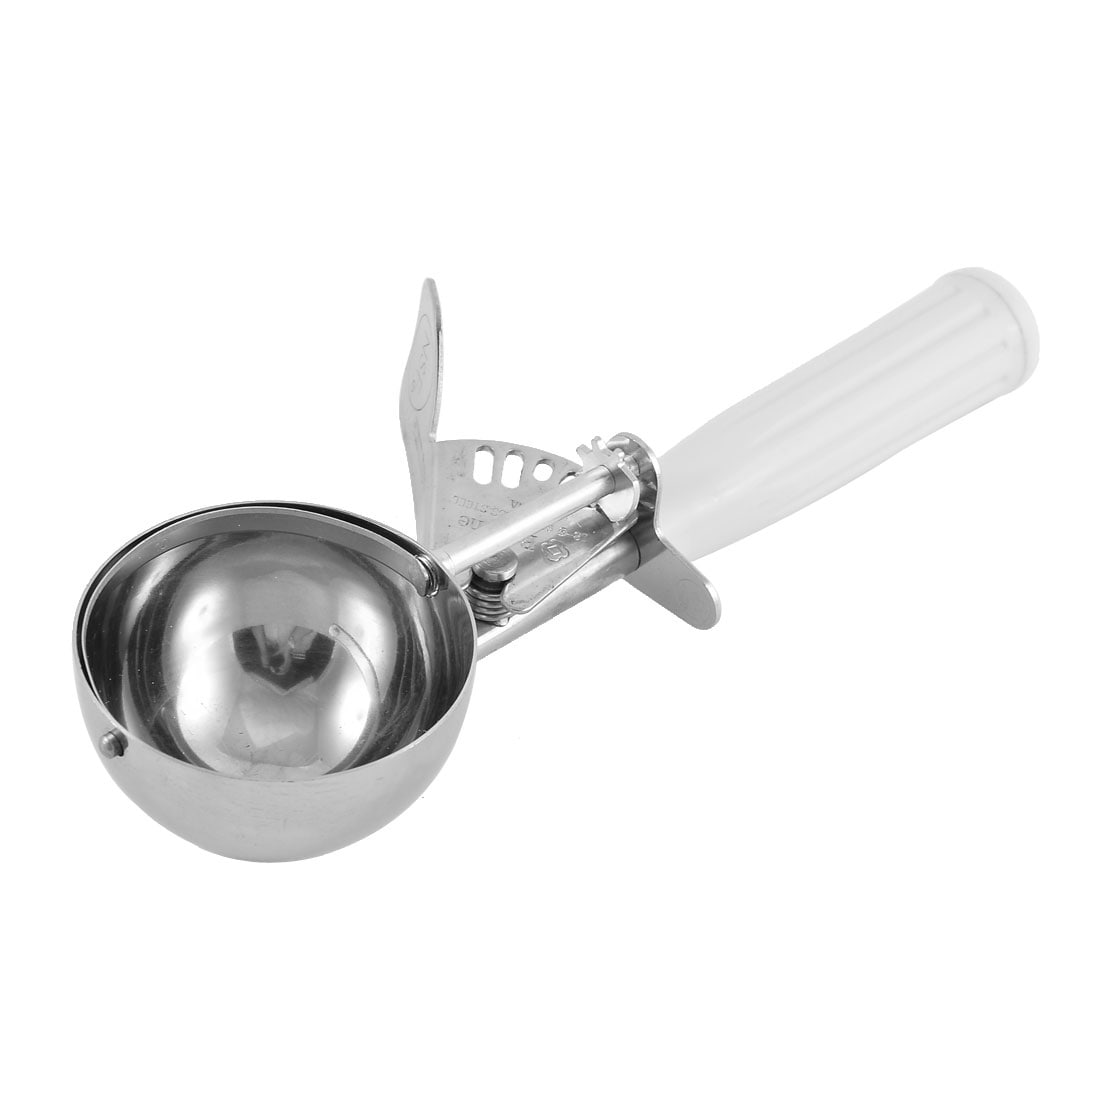 IS-4 4 oz. Stainless Steel Ice Scoop